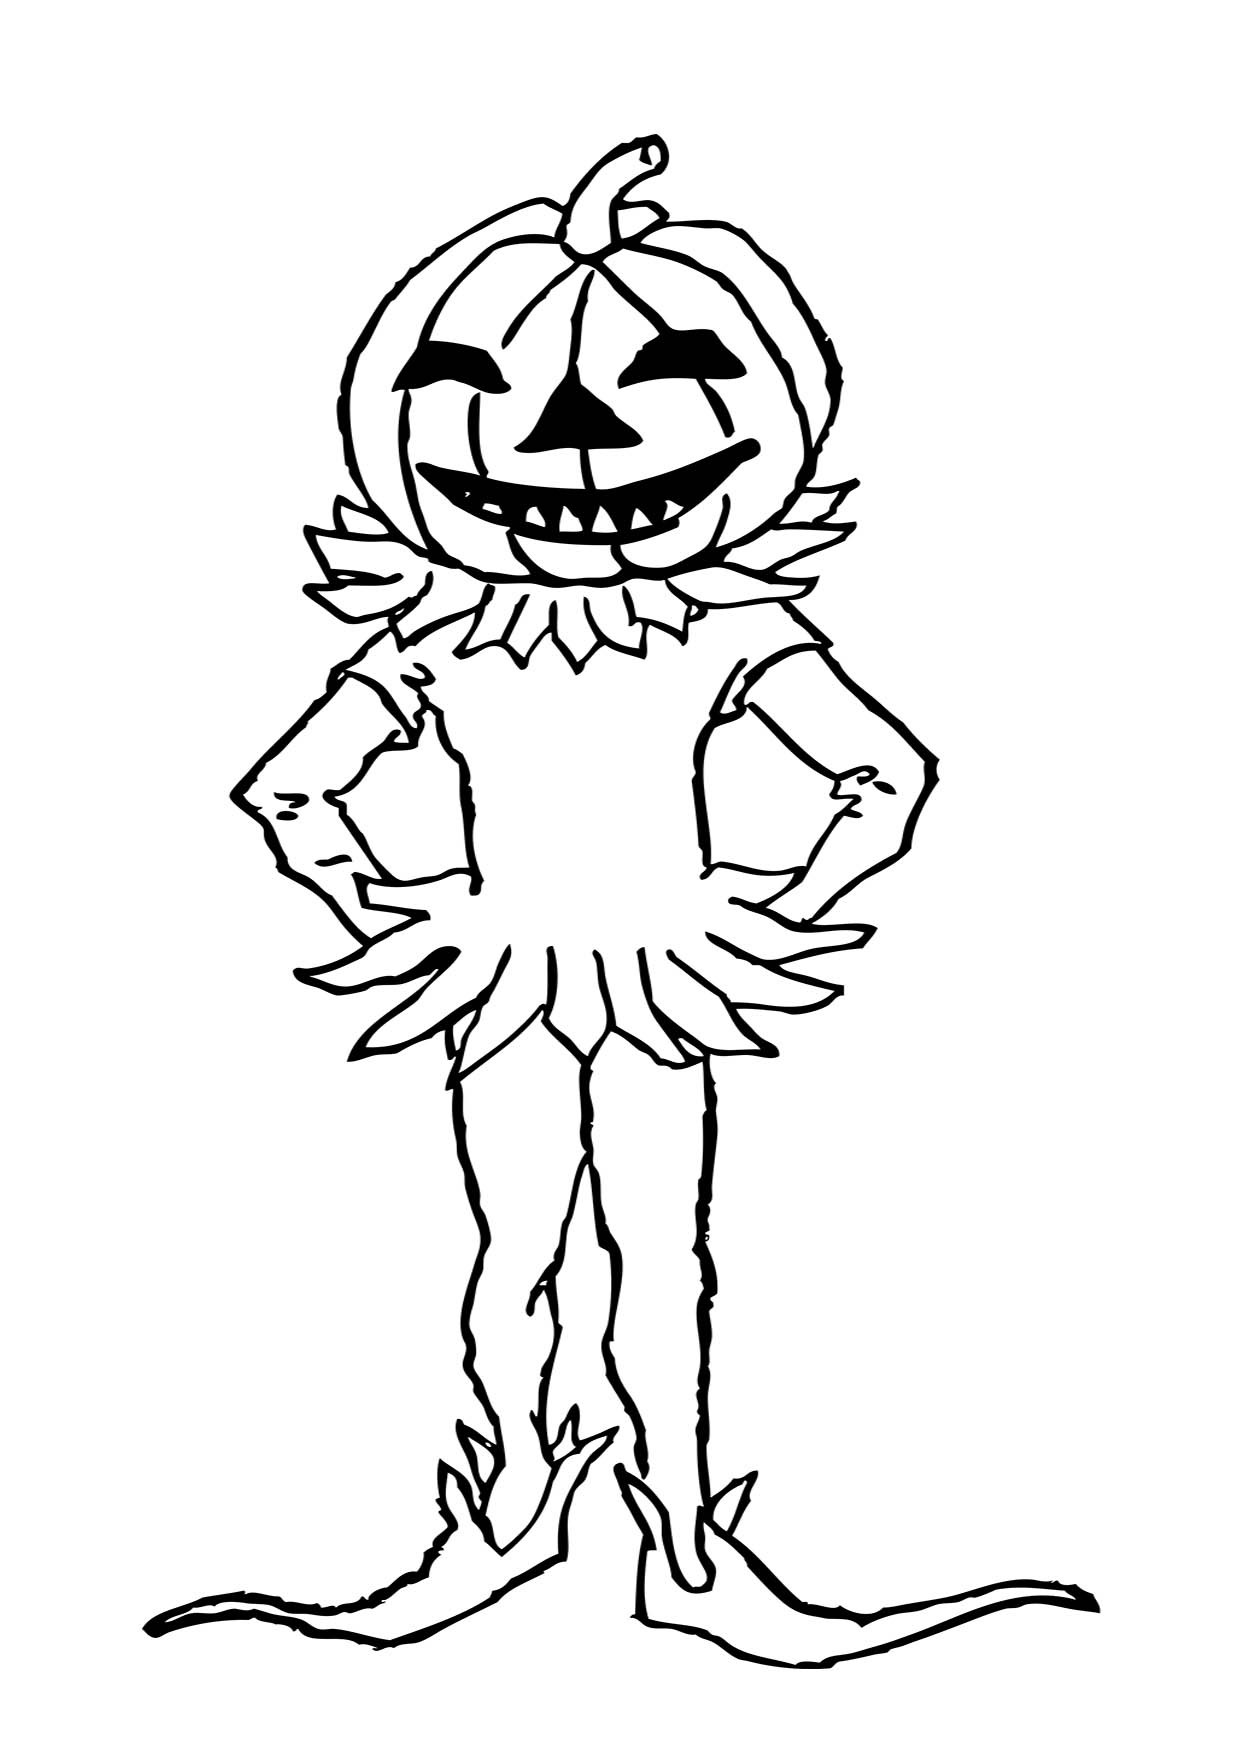 Halloween Coloring Pages For Boys
 Halloween Pumpkin Man Coloring Pages Sketch Coloring Page